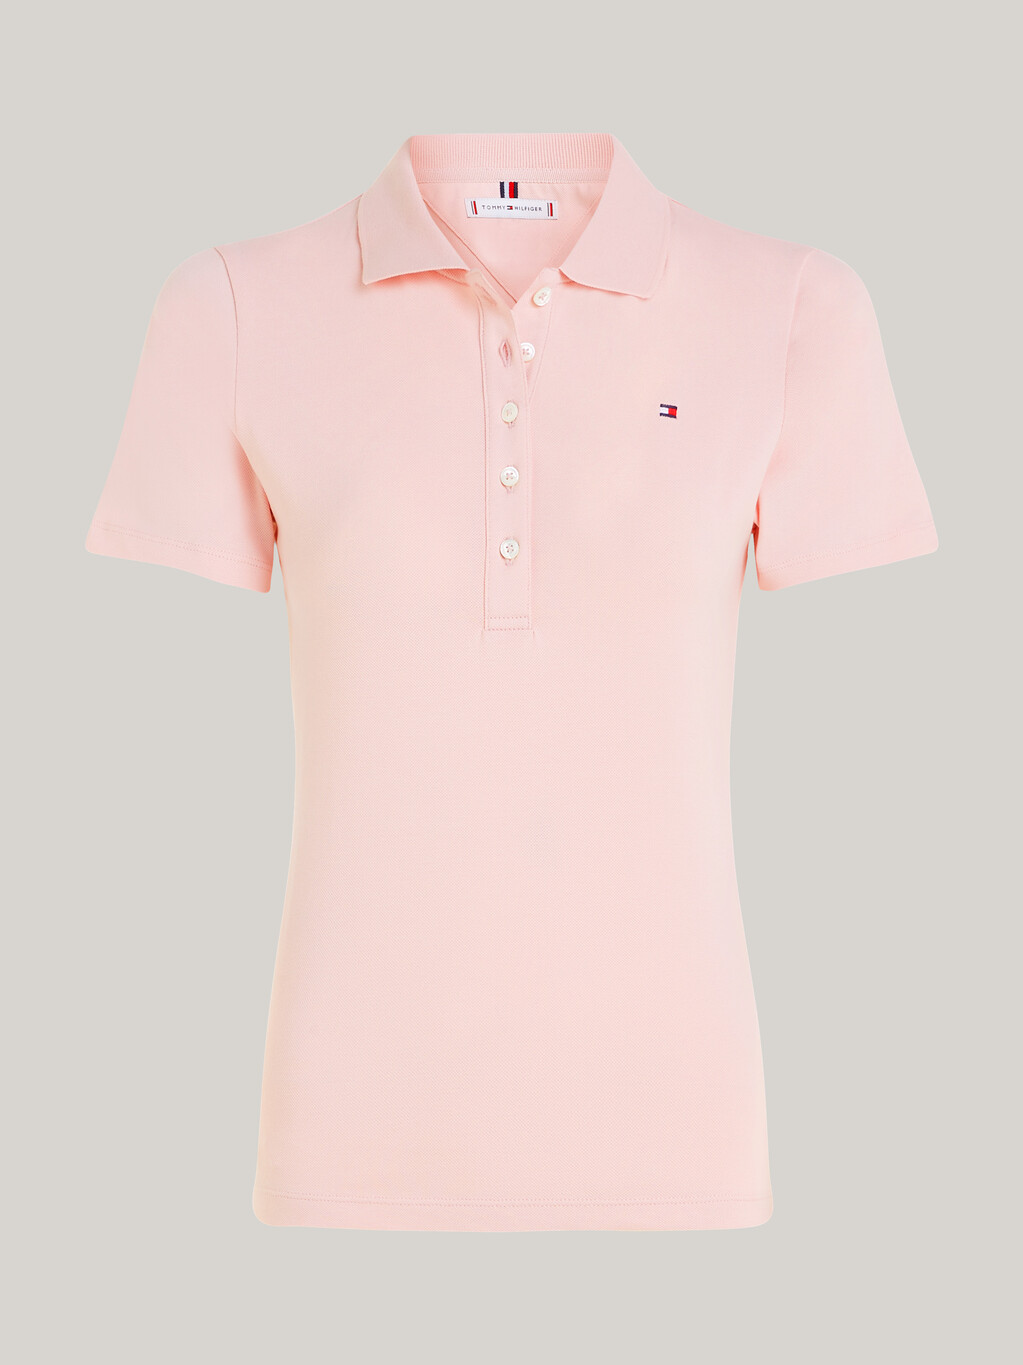 1985 Collection Slim Malaysia | Fit Hilfiger pink Tommy Polo 